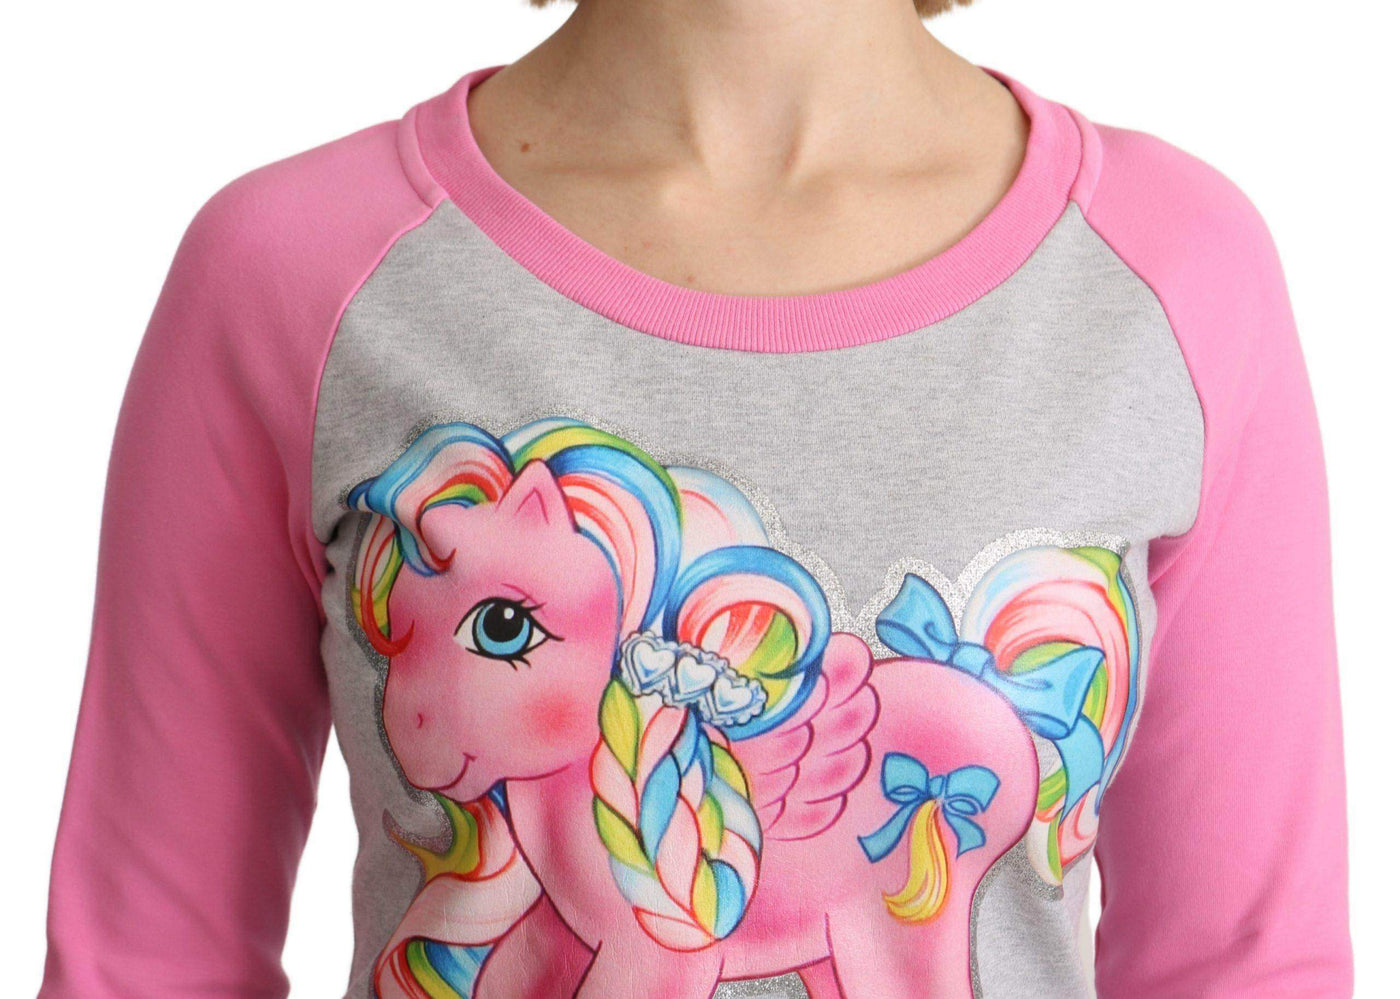 Moschino  My Little Pony Top Sweater Dress #women, Catch, Clothing_Dress, Dresses - Women - Clothing, feed-agegroup-adult, feed-color-gray, feed-gender-female, feed-size-IT36 | XS, feed-size-IT38|XS, feed-size-IT40 | M, feed-size-IT42|M, feed-size-IT44|L, feed-size-IT46|XL, Gender_Women, Gray, IT36 | XS, IT38|XS, IT40 | M, IT42|M, IT44|L, IT46|XL, Kogan, Moschino, Women - New Arrivals at SEYMAYKA